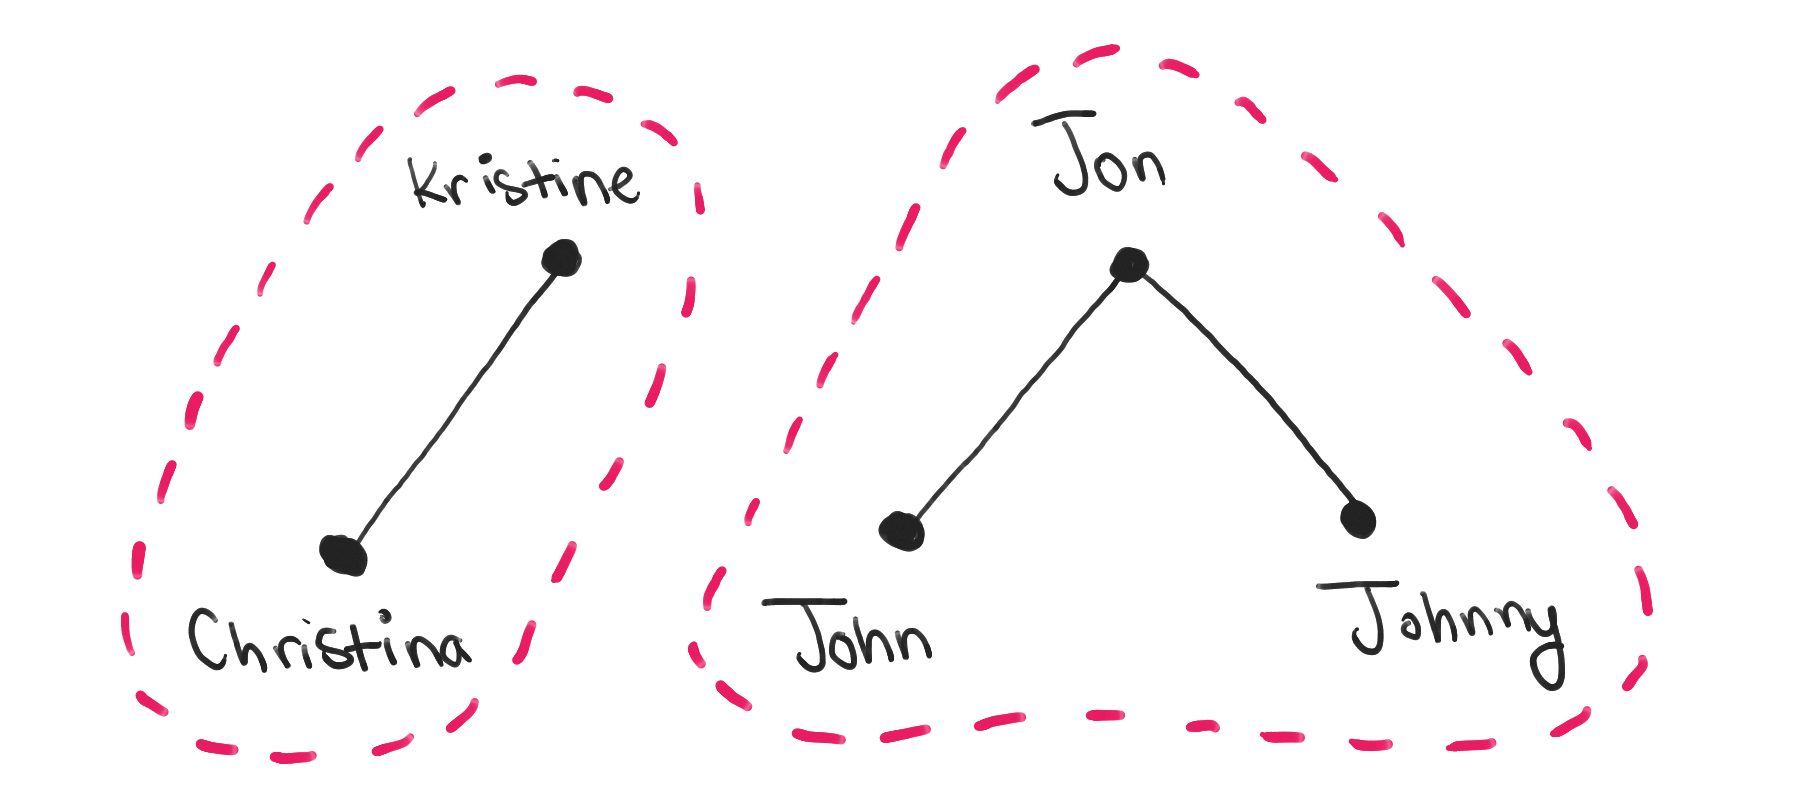 The same graph as before, but with each connected component surrounded by a dashed line. On the left is the component containing "Christina" and "Kristine", and on the right is the component containing "John", "Jon" and "Johnny".